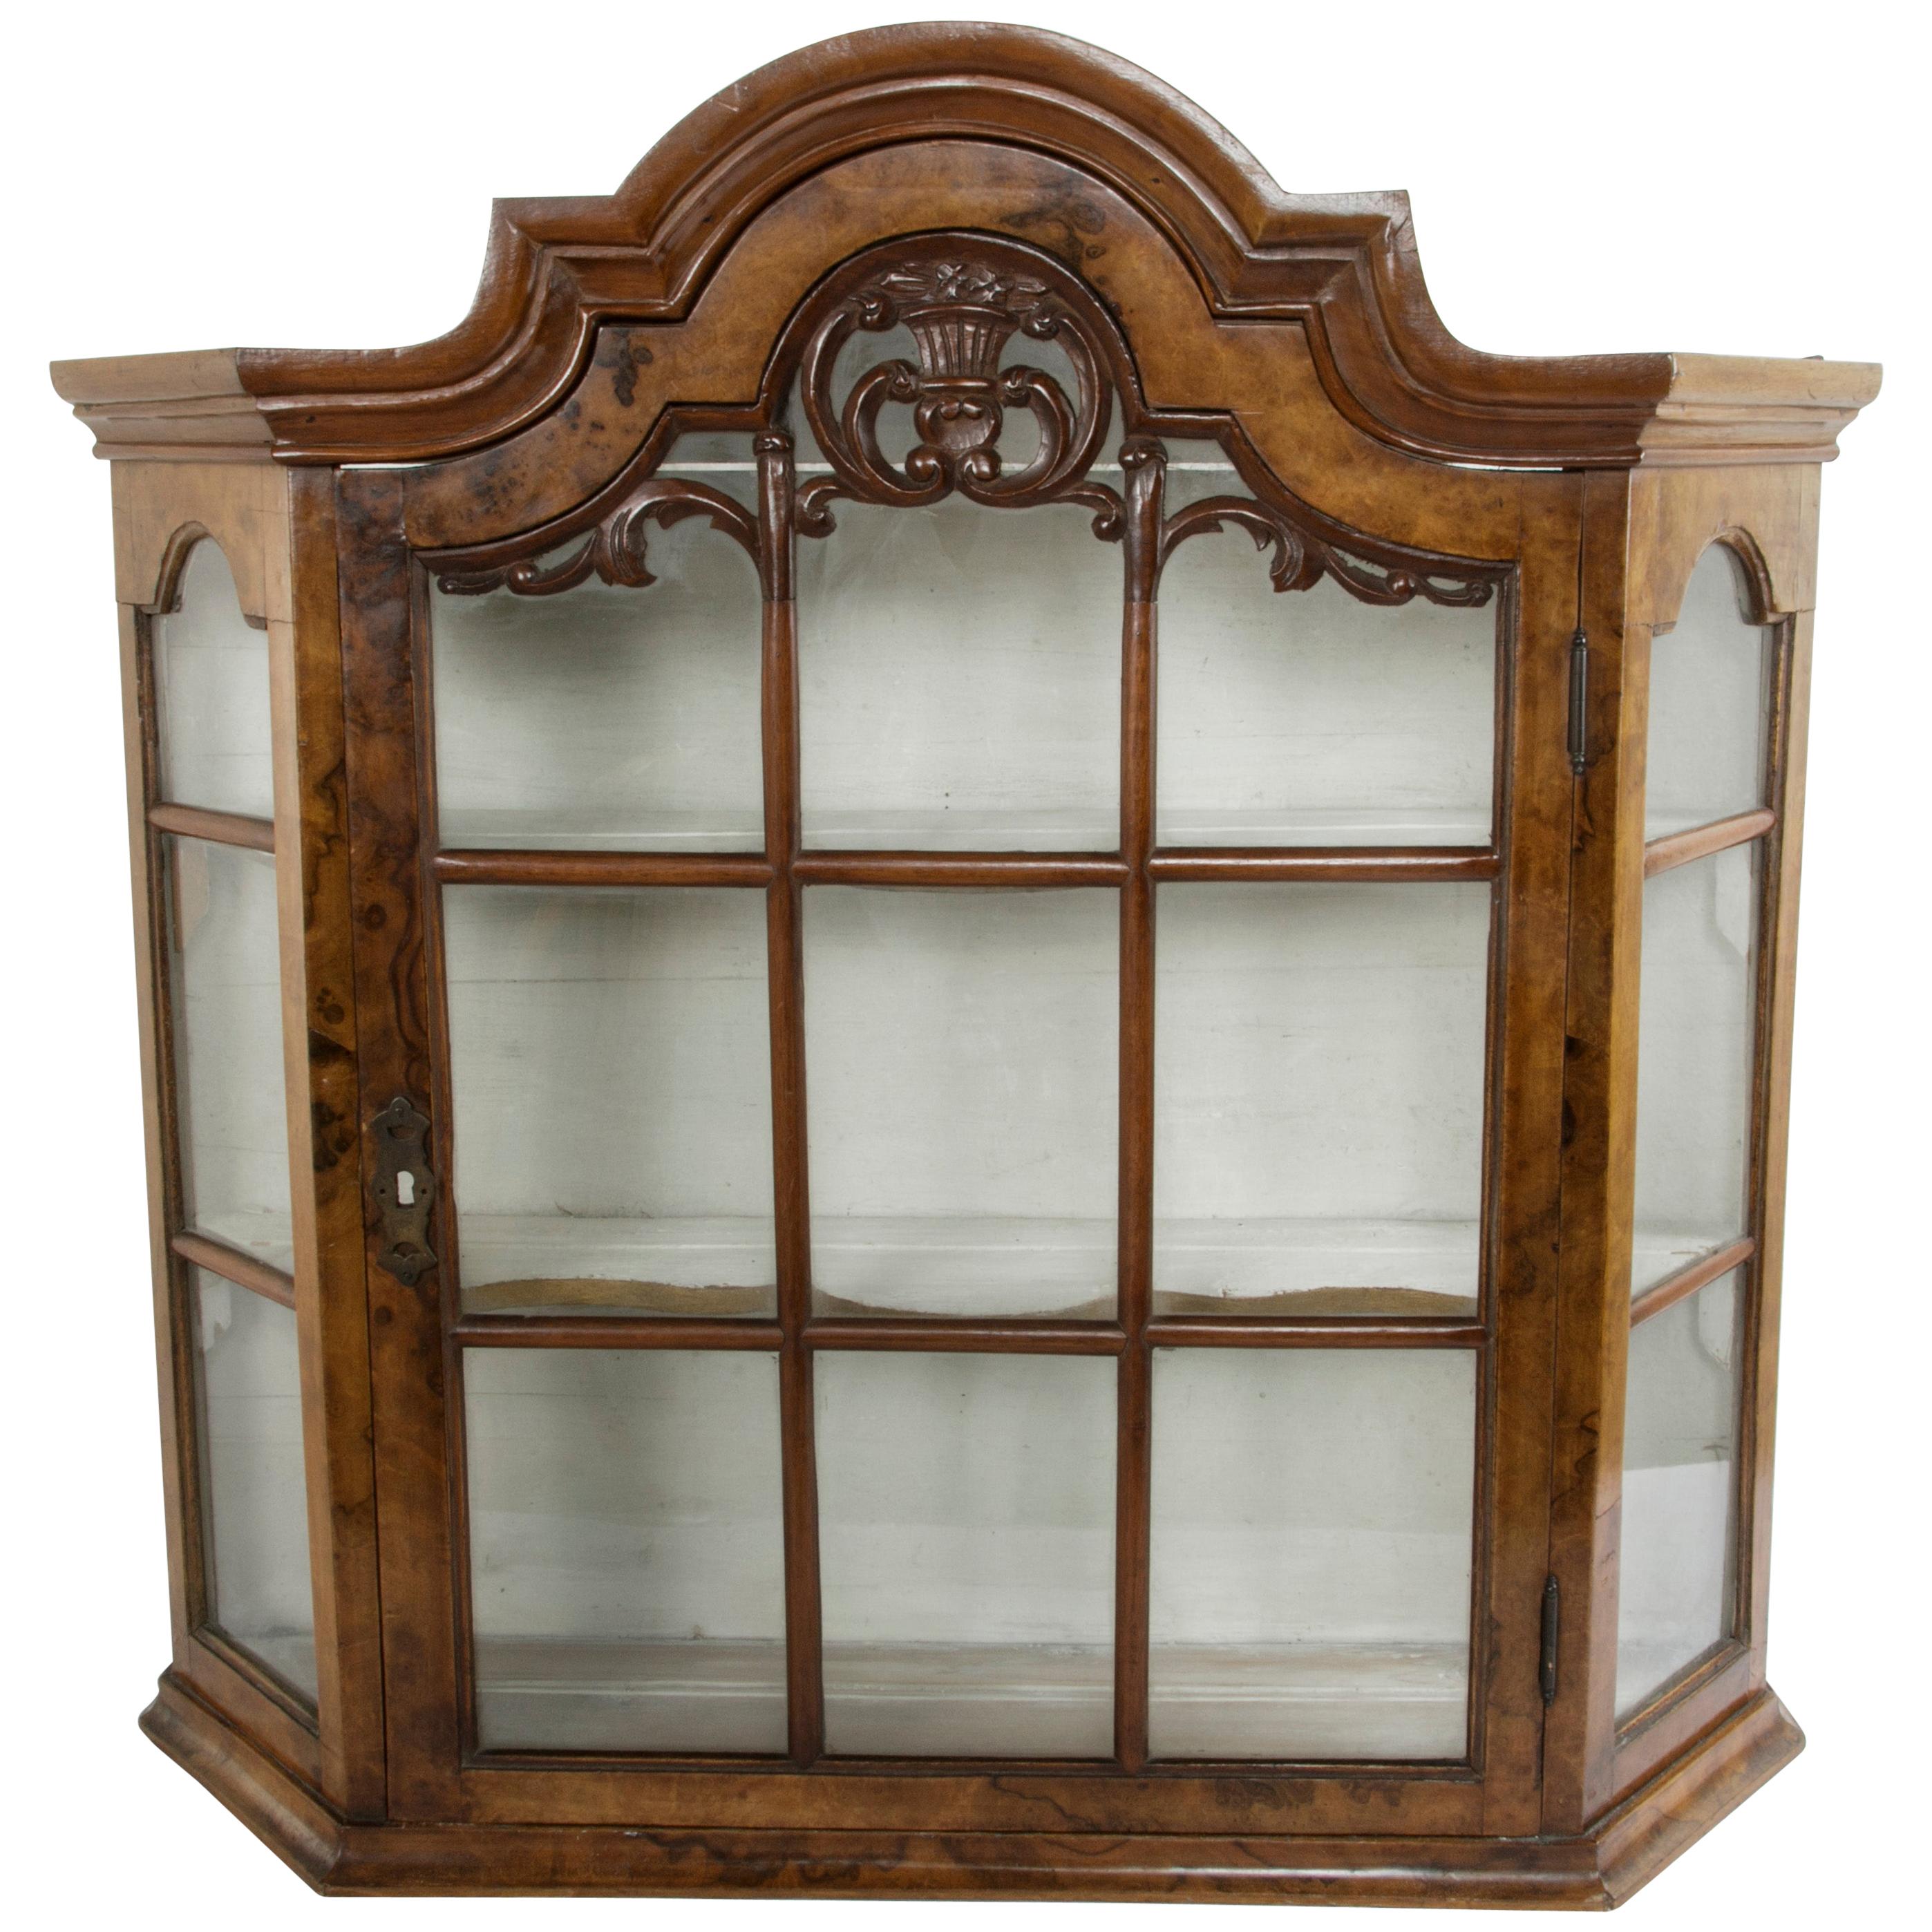 Late 19th Century Dutch Walnut Wall Cabinet or Table Top Vitrine with Glass